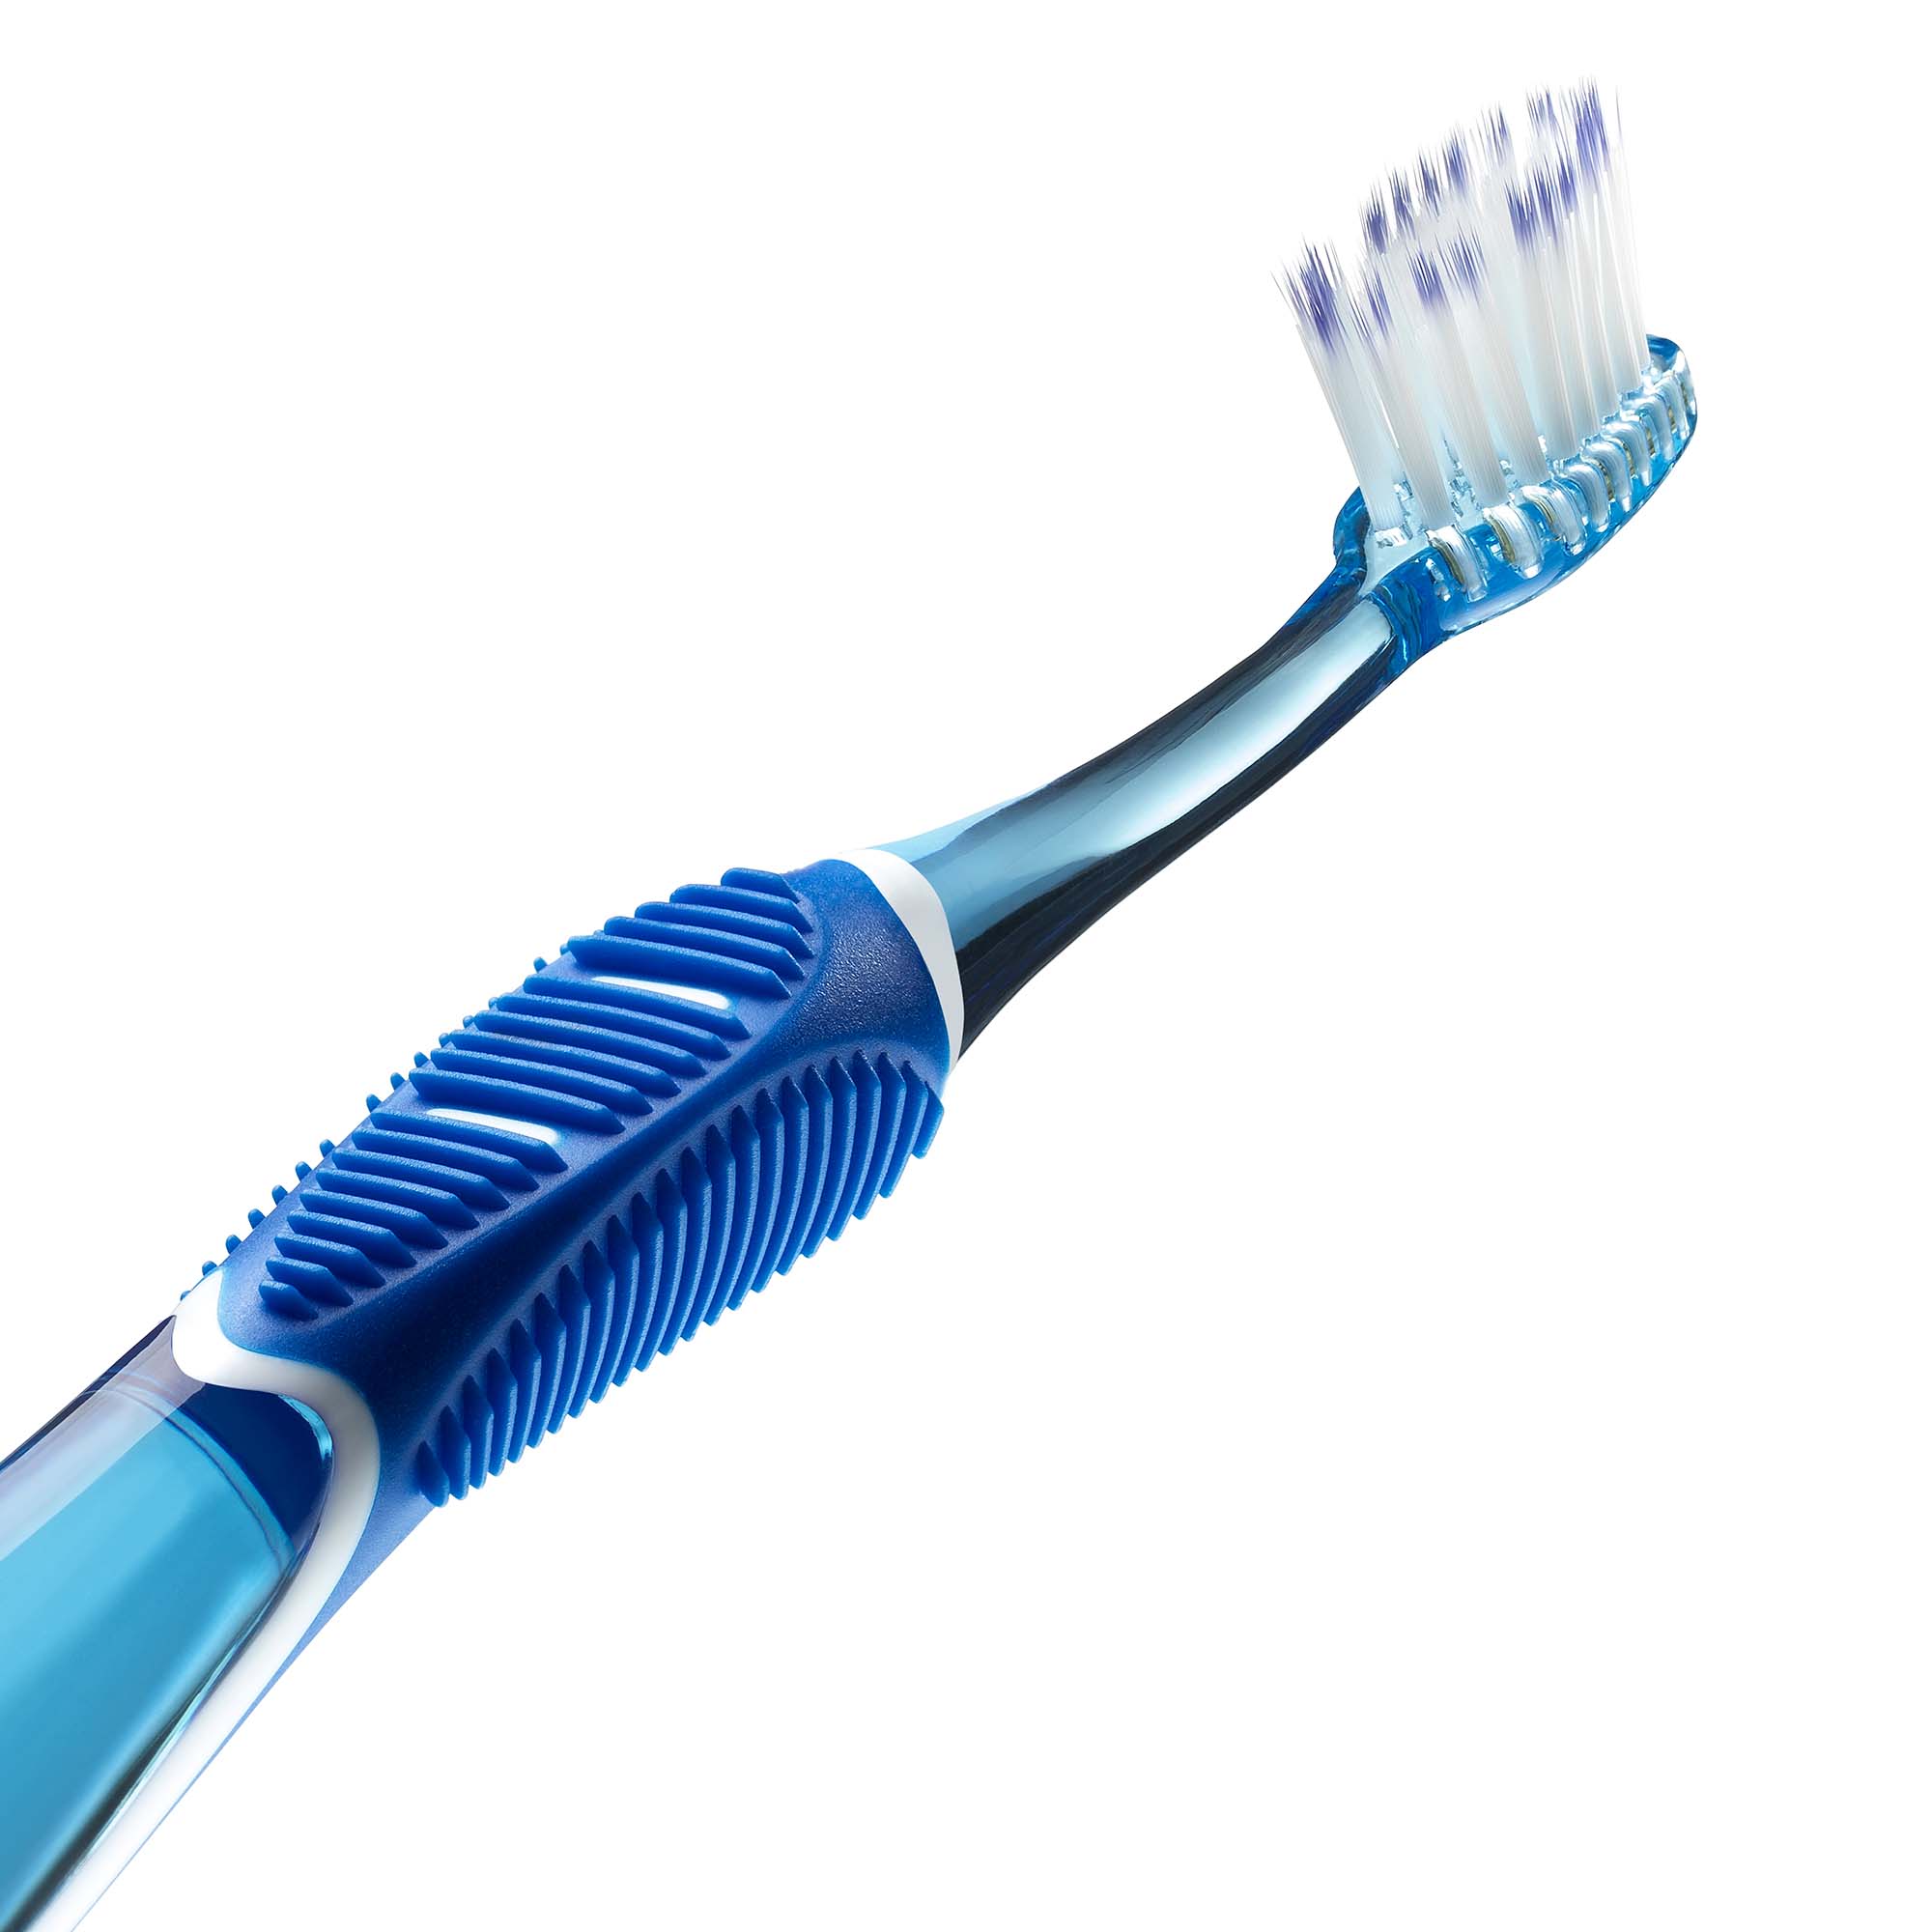 525-GUM-PRO-Toothbrush-Blue-compact-soft-with-zoom-on-grip.jpg